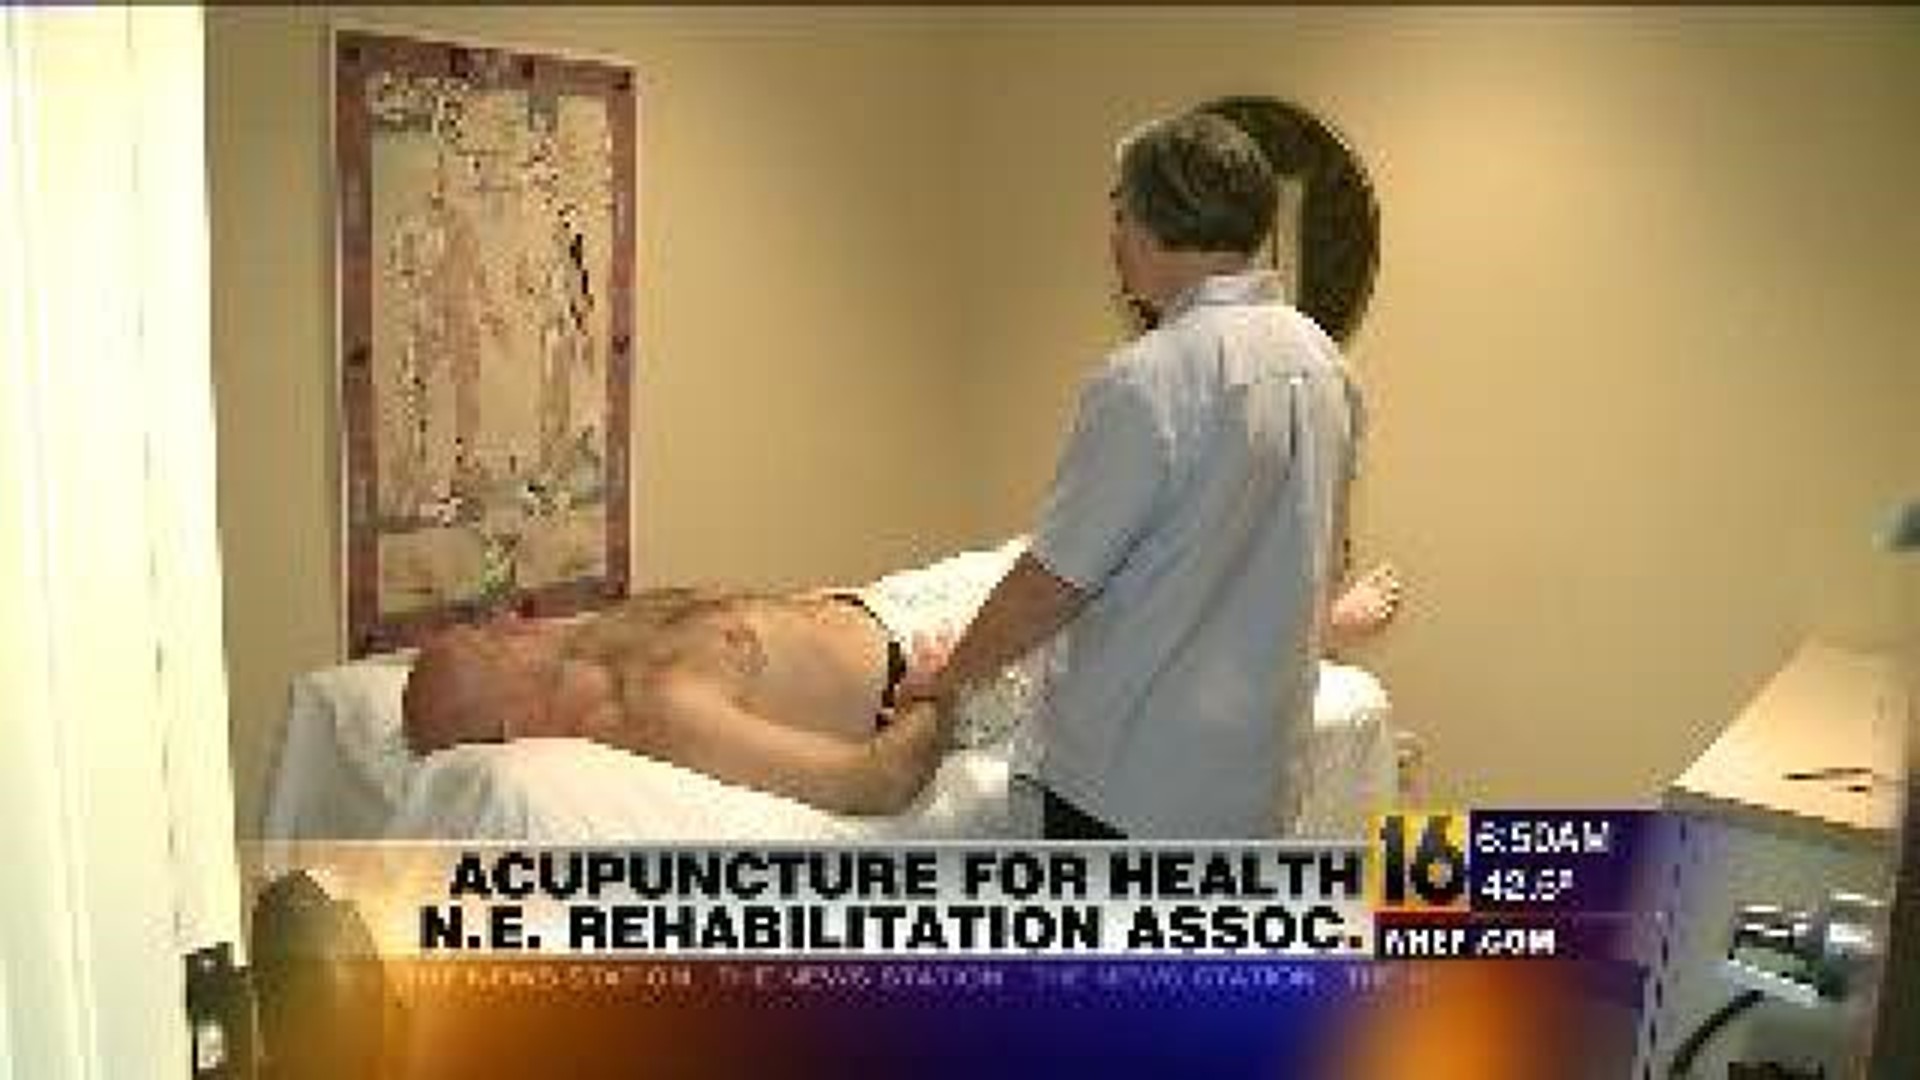 RR3: Acupuncture For Health